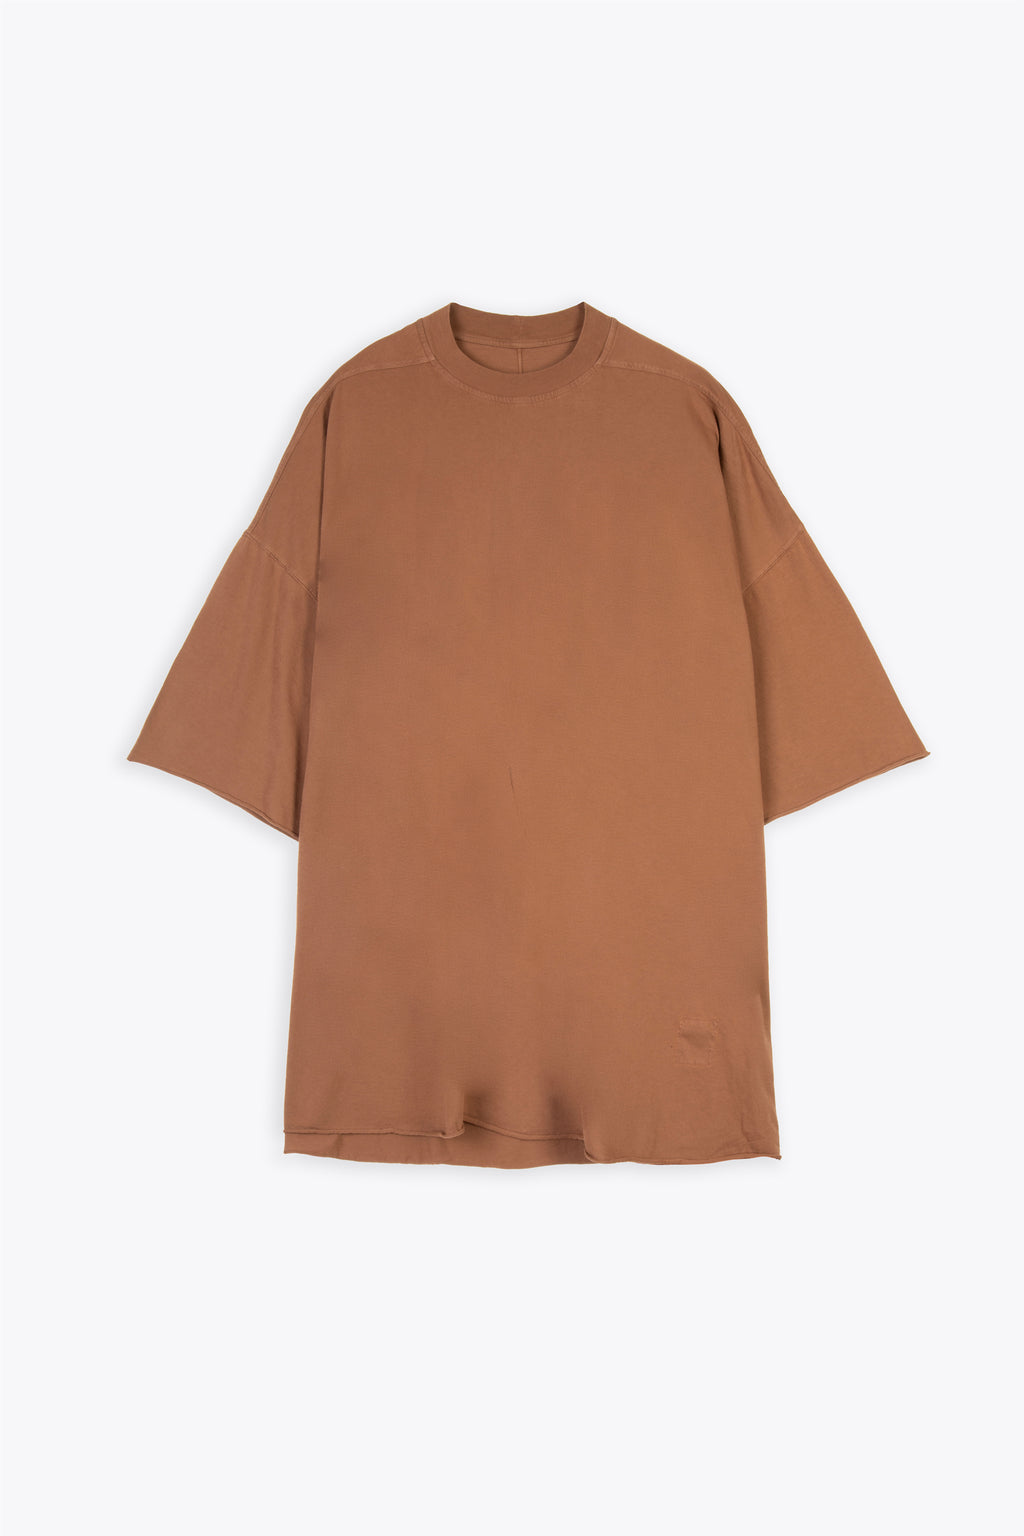 alt-image__Brown-cotton-oversized-t-shirt-with-raw-cut-hems---Tommy-T